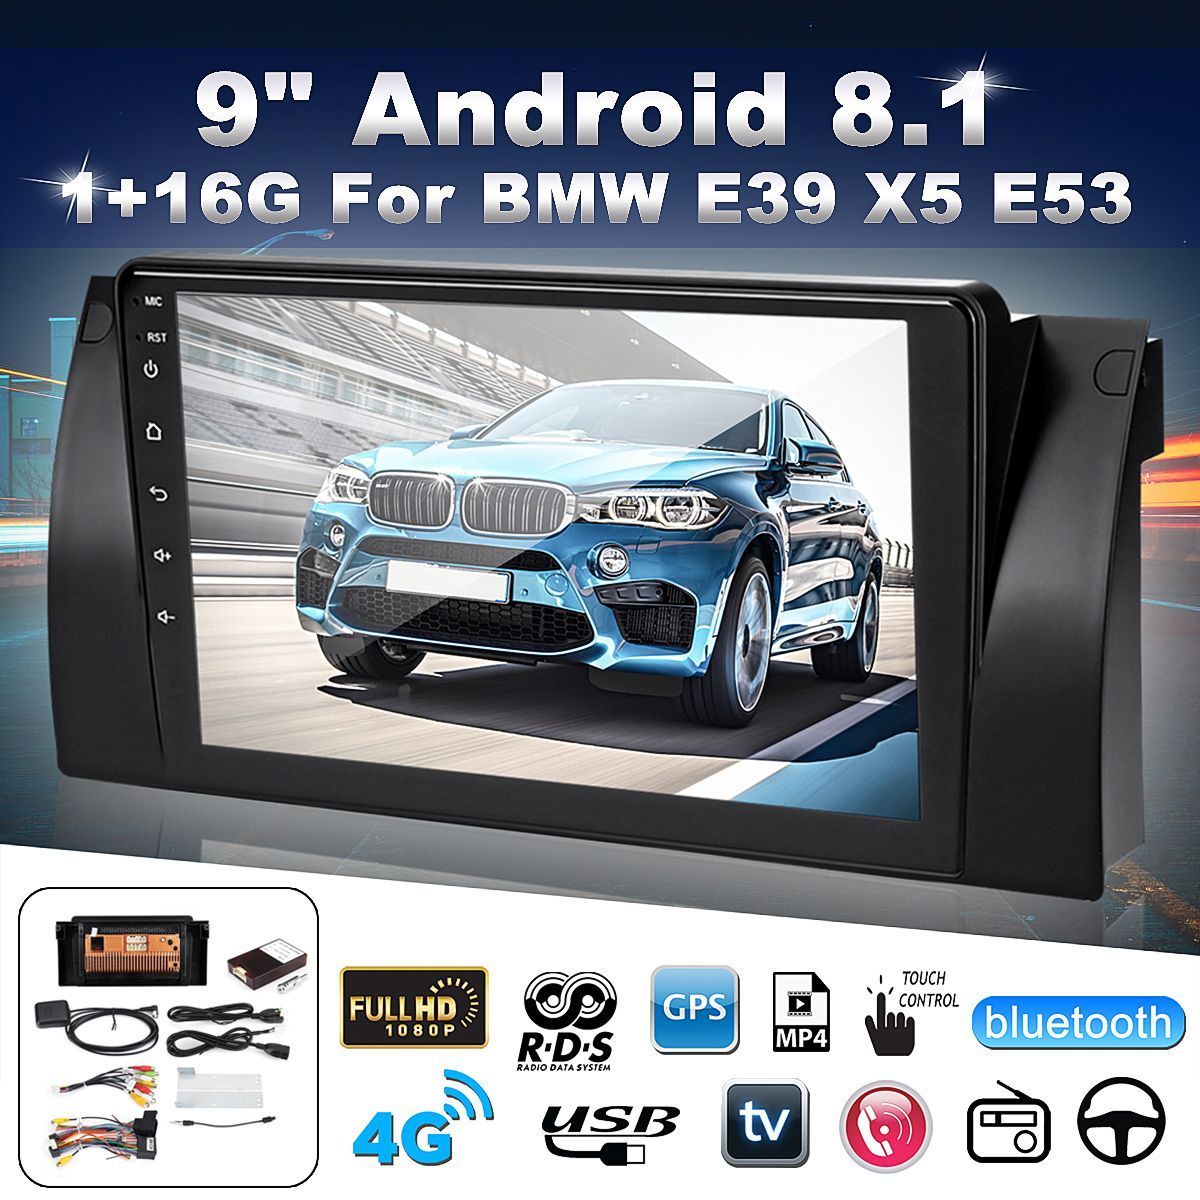 9-Inch-Android-81-Car-Stereo-Radio-MP5-Player-Dash-Video-Quad-Core-116GB-Wifi-GPS-Built-in-Microphon-1479715